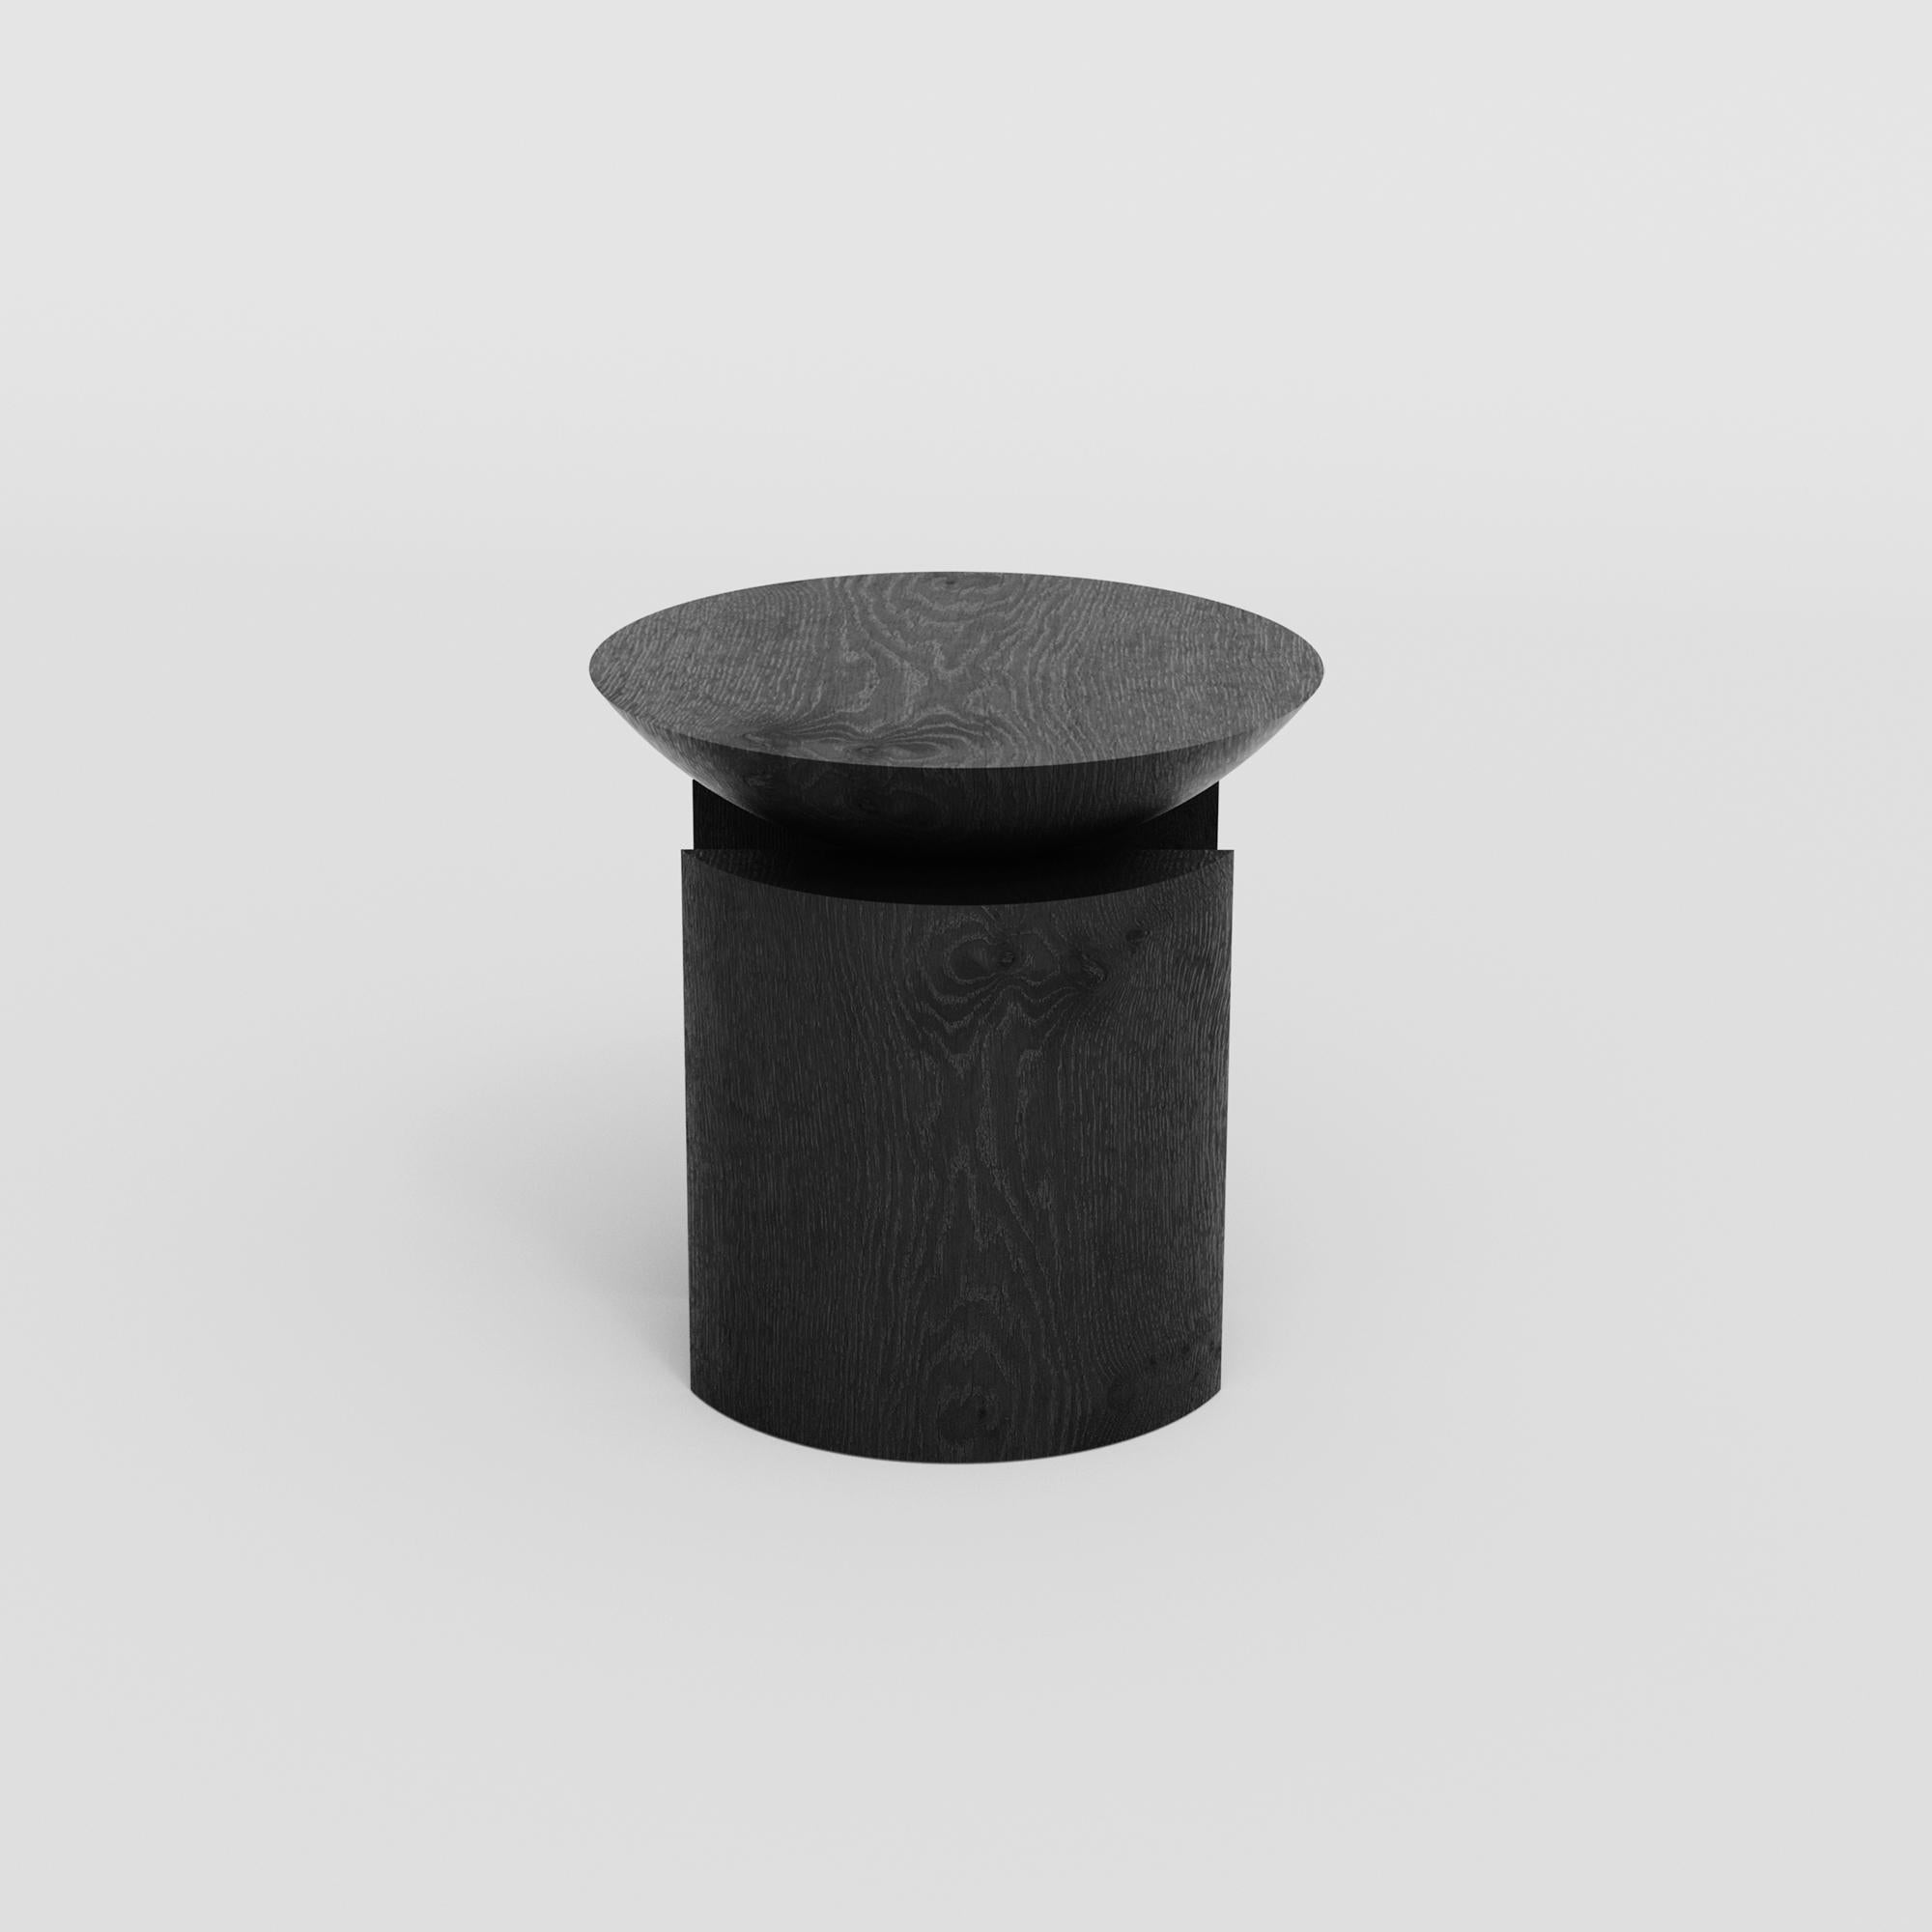 Hand-Crafted Anca Alta Sculptural Side Table/Stool Tropical Hardwood by Pedro Paulo Venzon